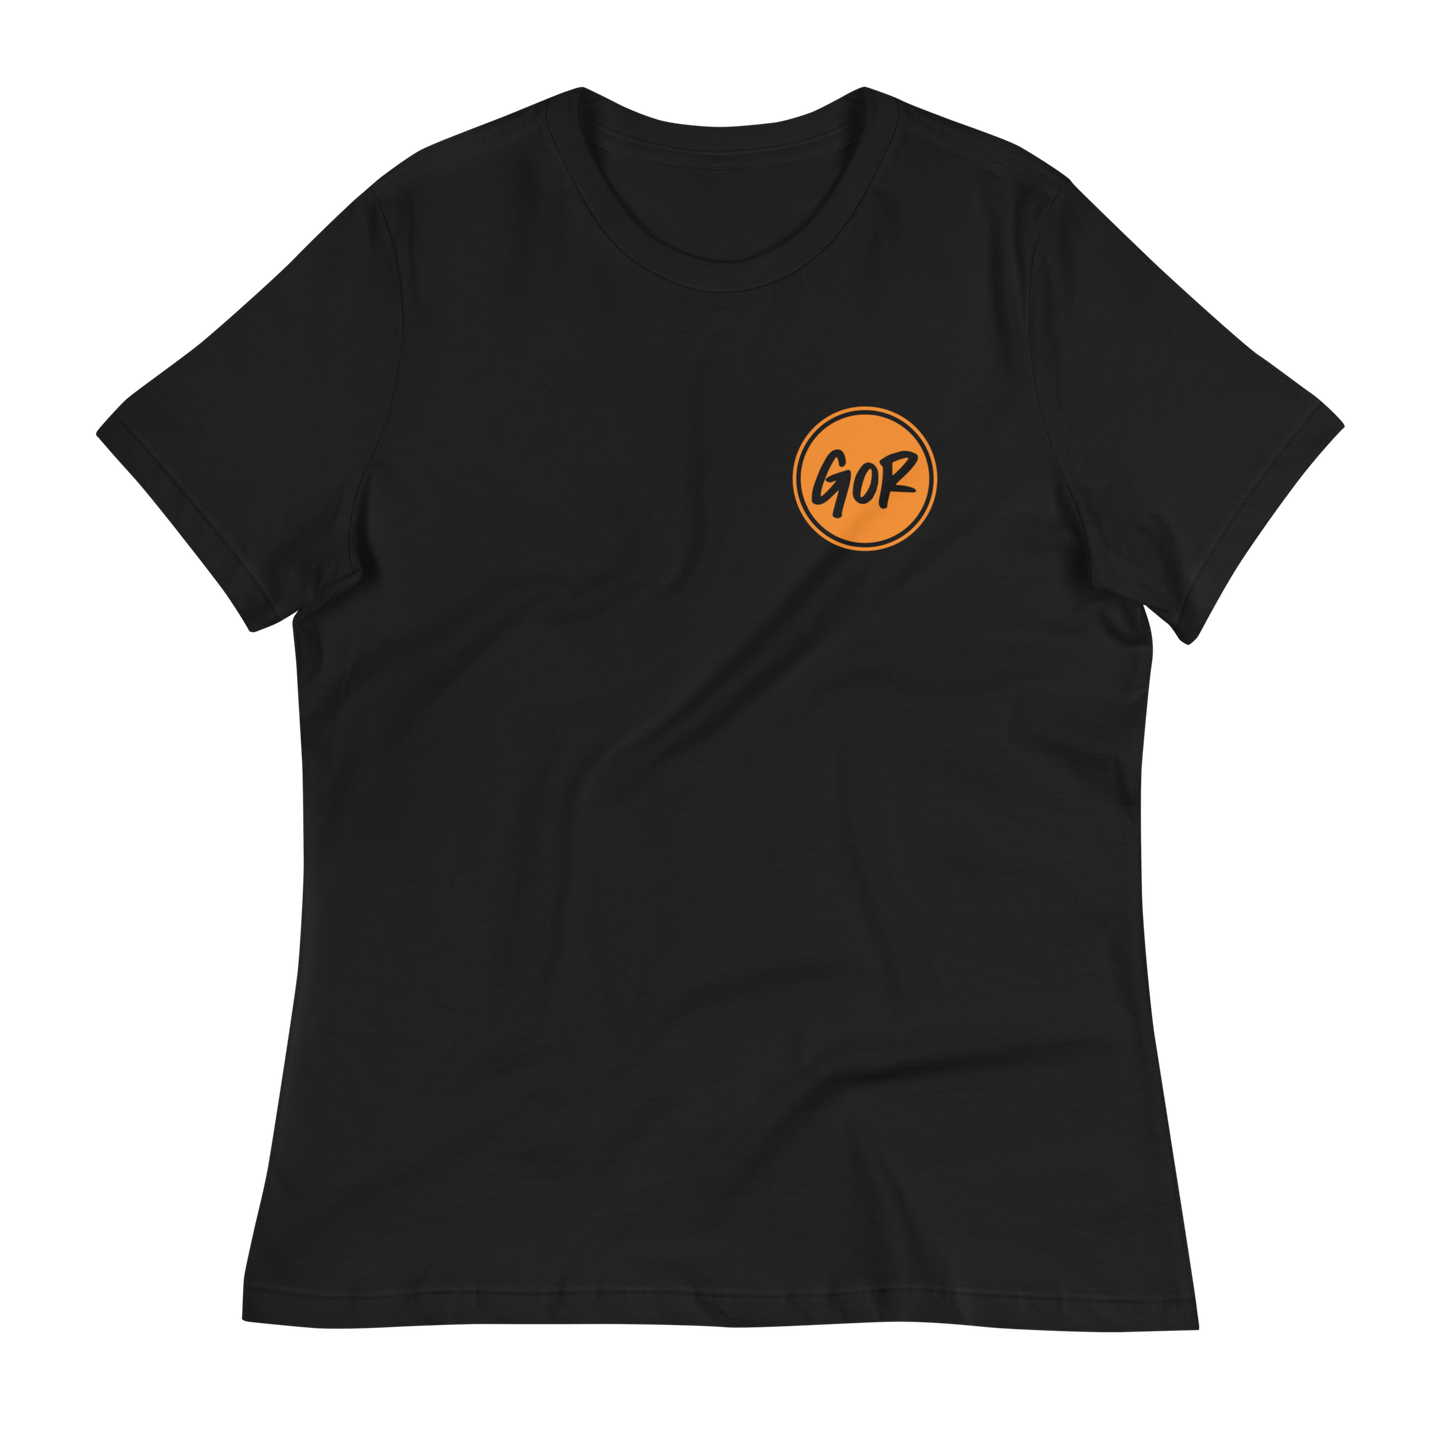 Women's Relaxed T-Shirt (small icon logo)